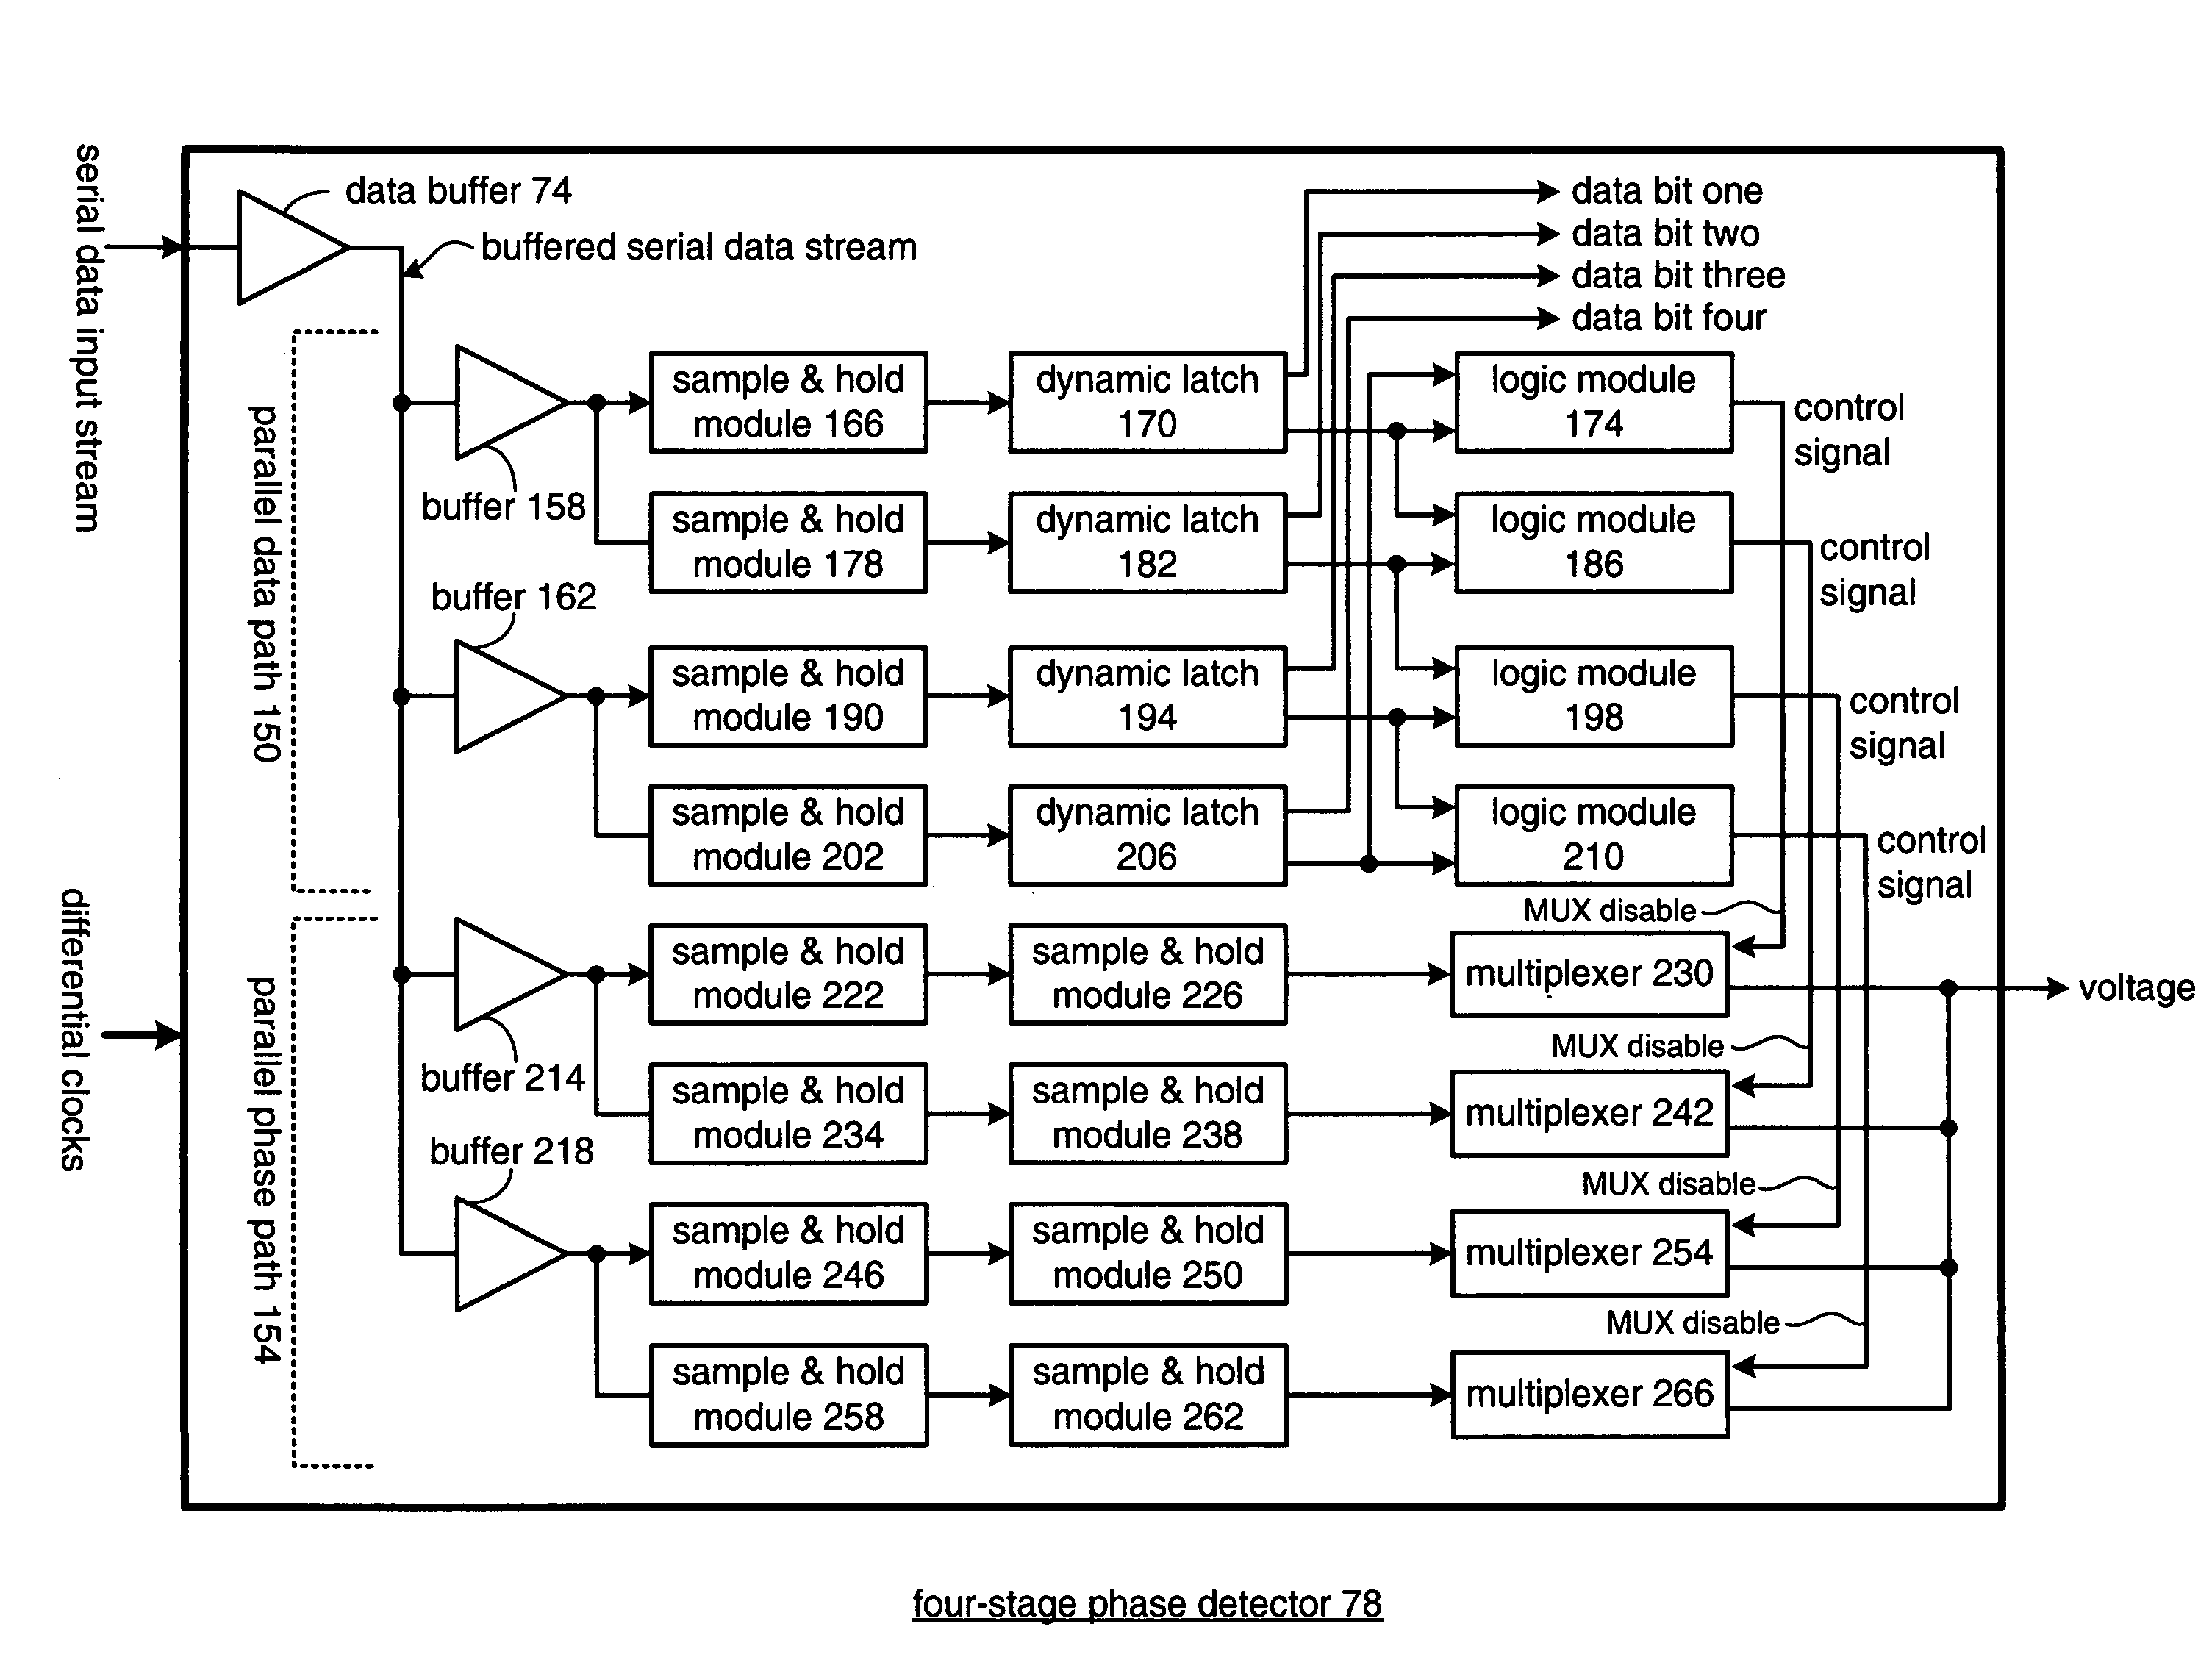 Multi-stage phase detector